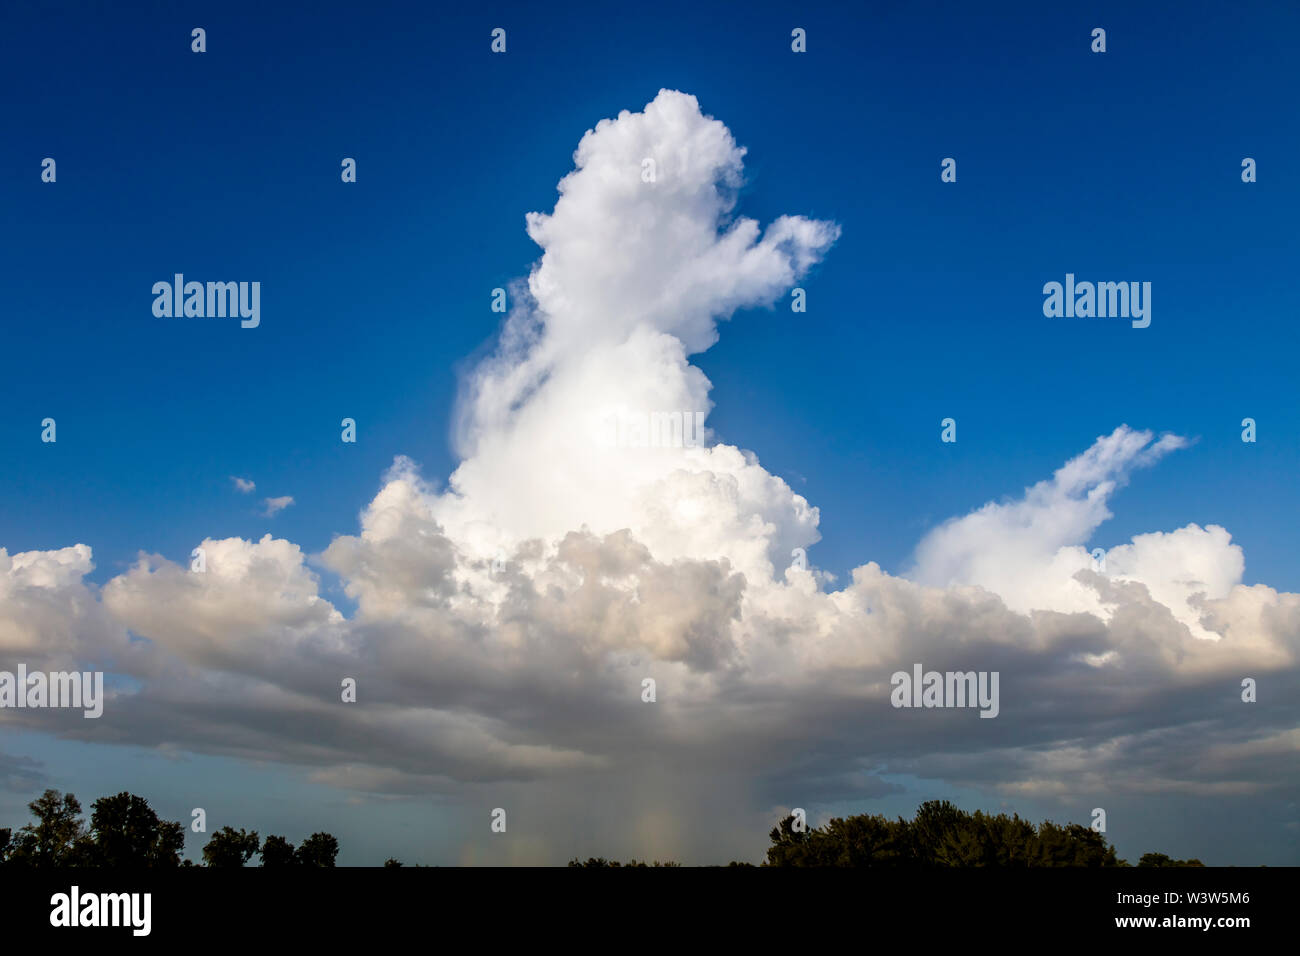 Thunderstorm over Venice in Florida Stock Photo